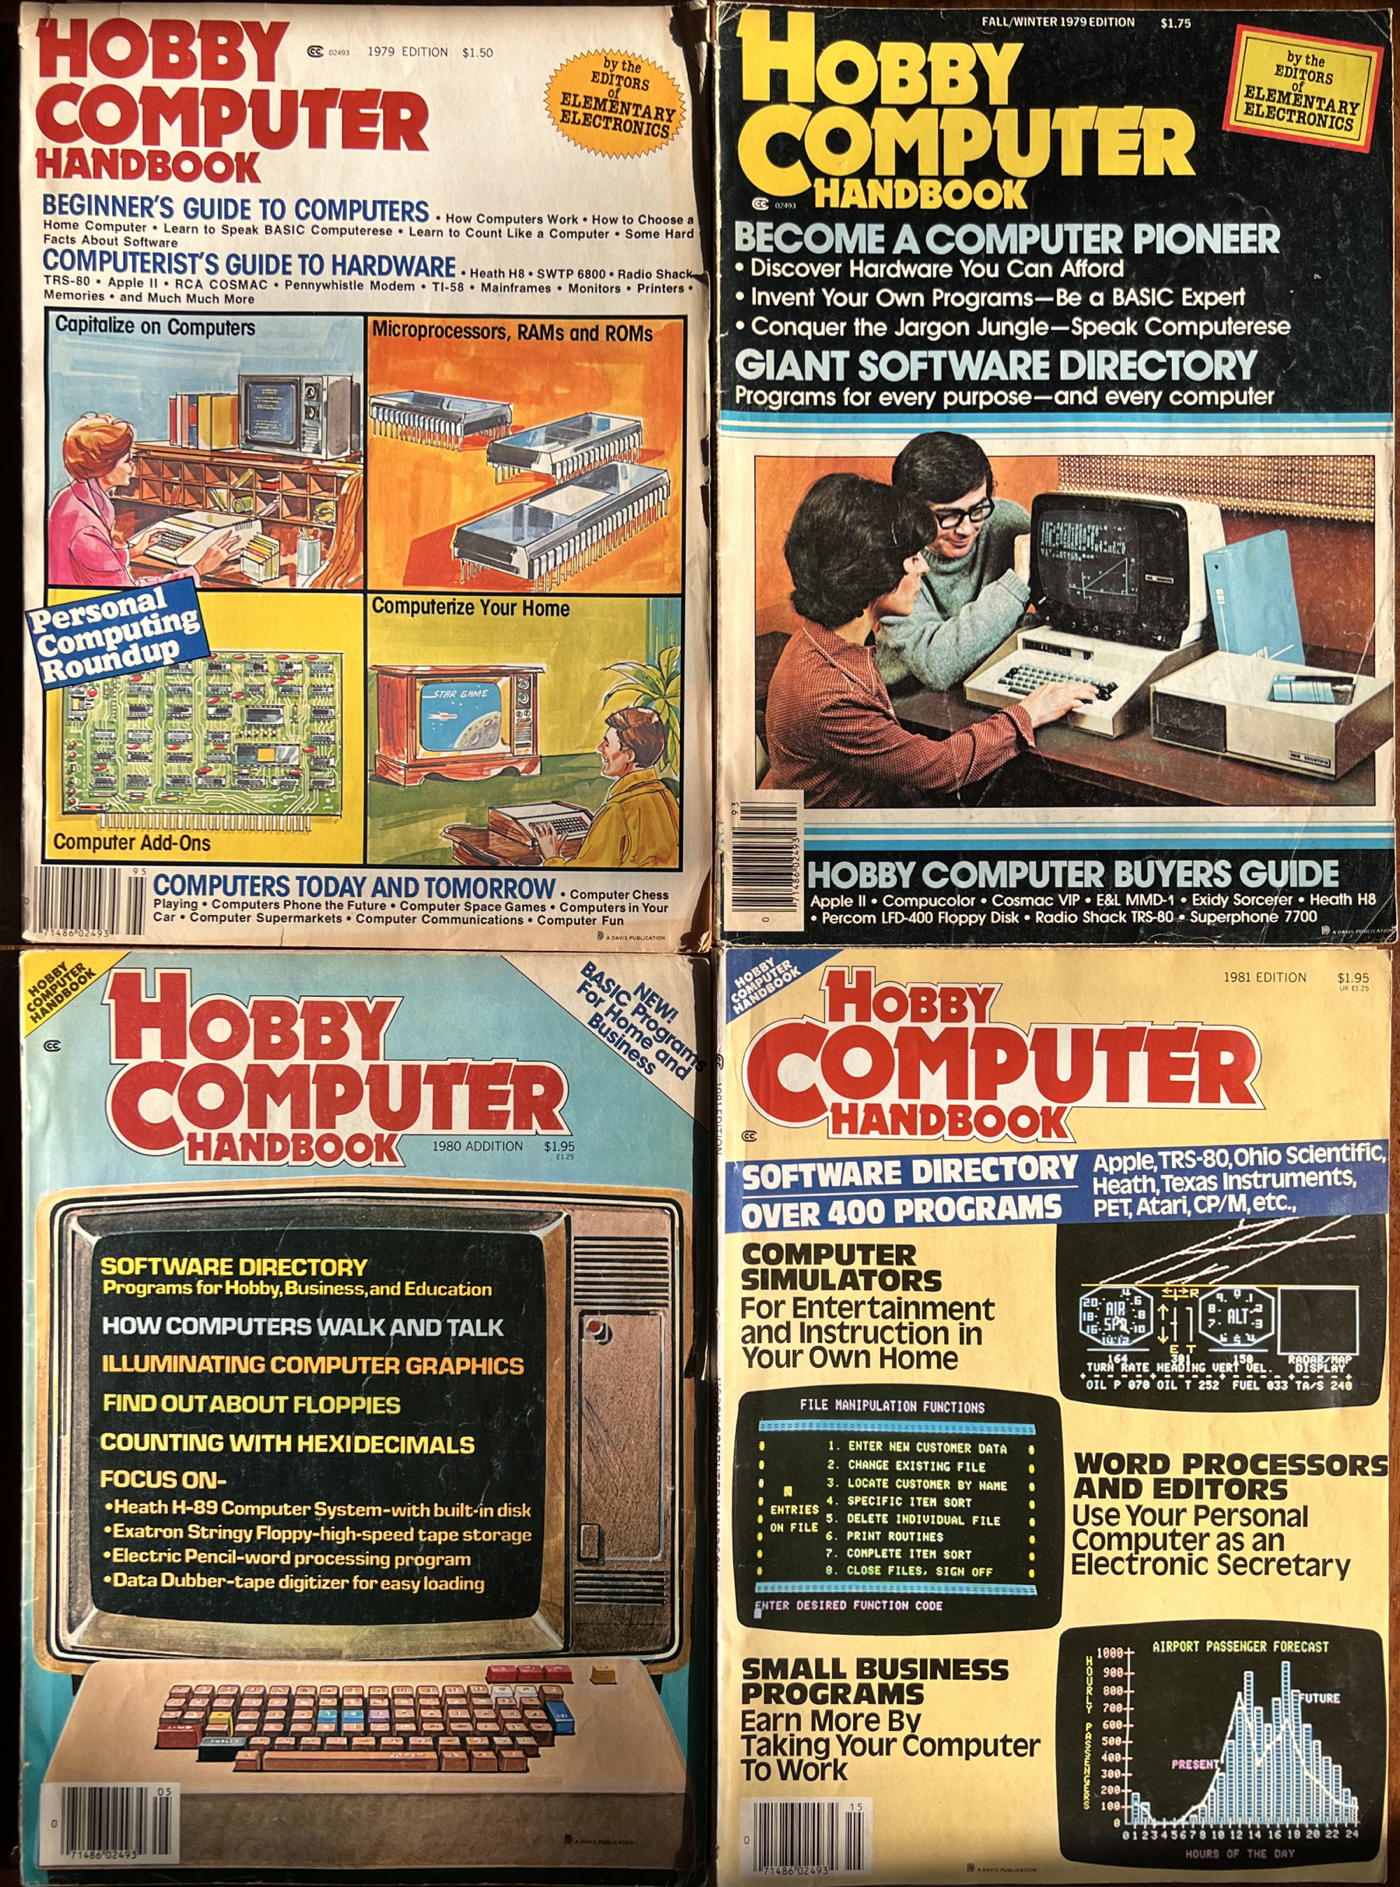 Four covers of Hobby Computer Handbook